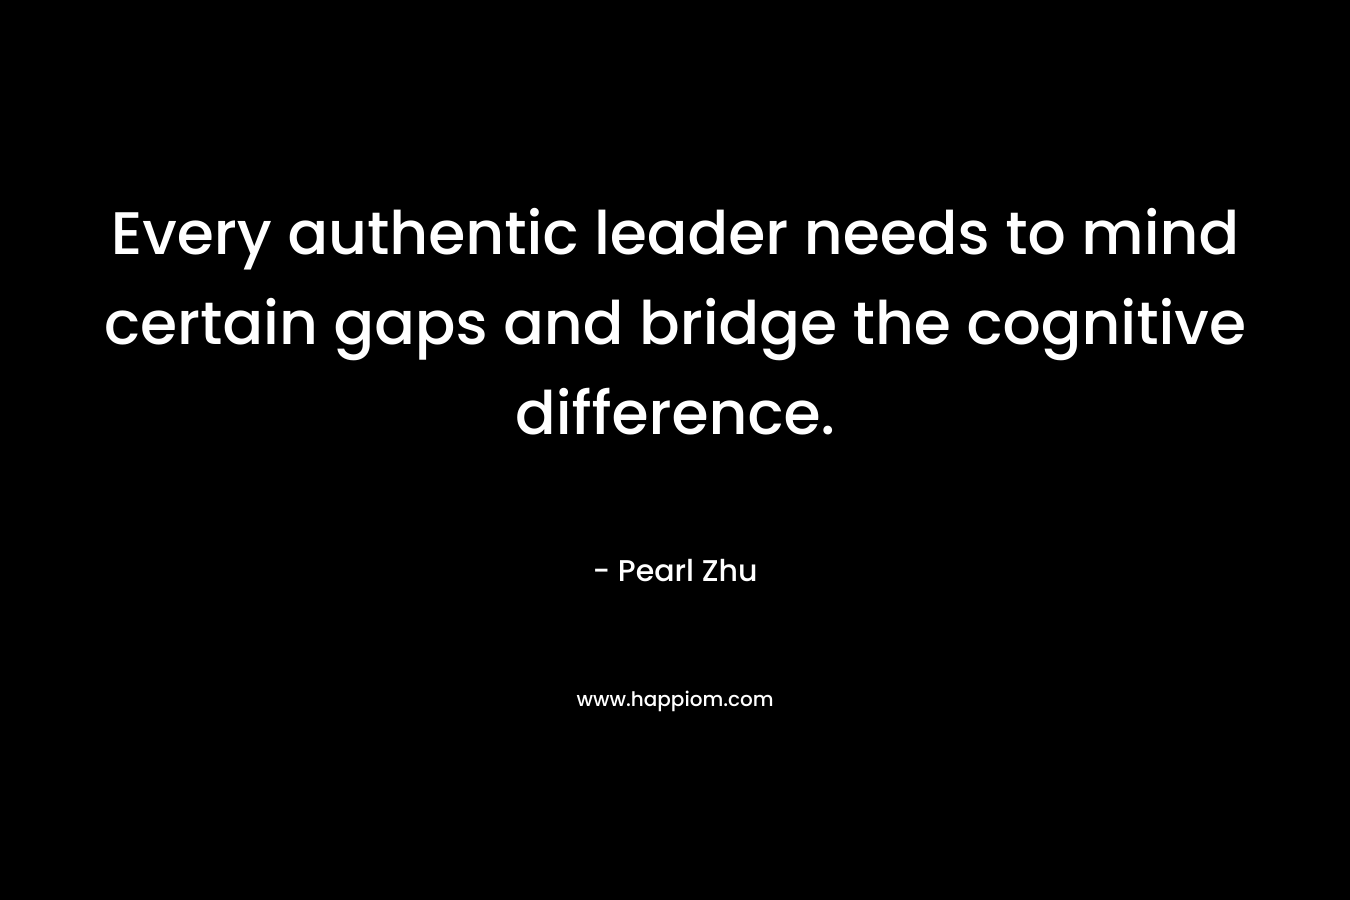 Every authentic leader needs to mind certain gaps and bridge the cognitive difference.